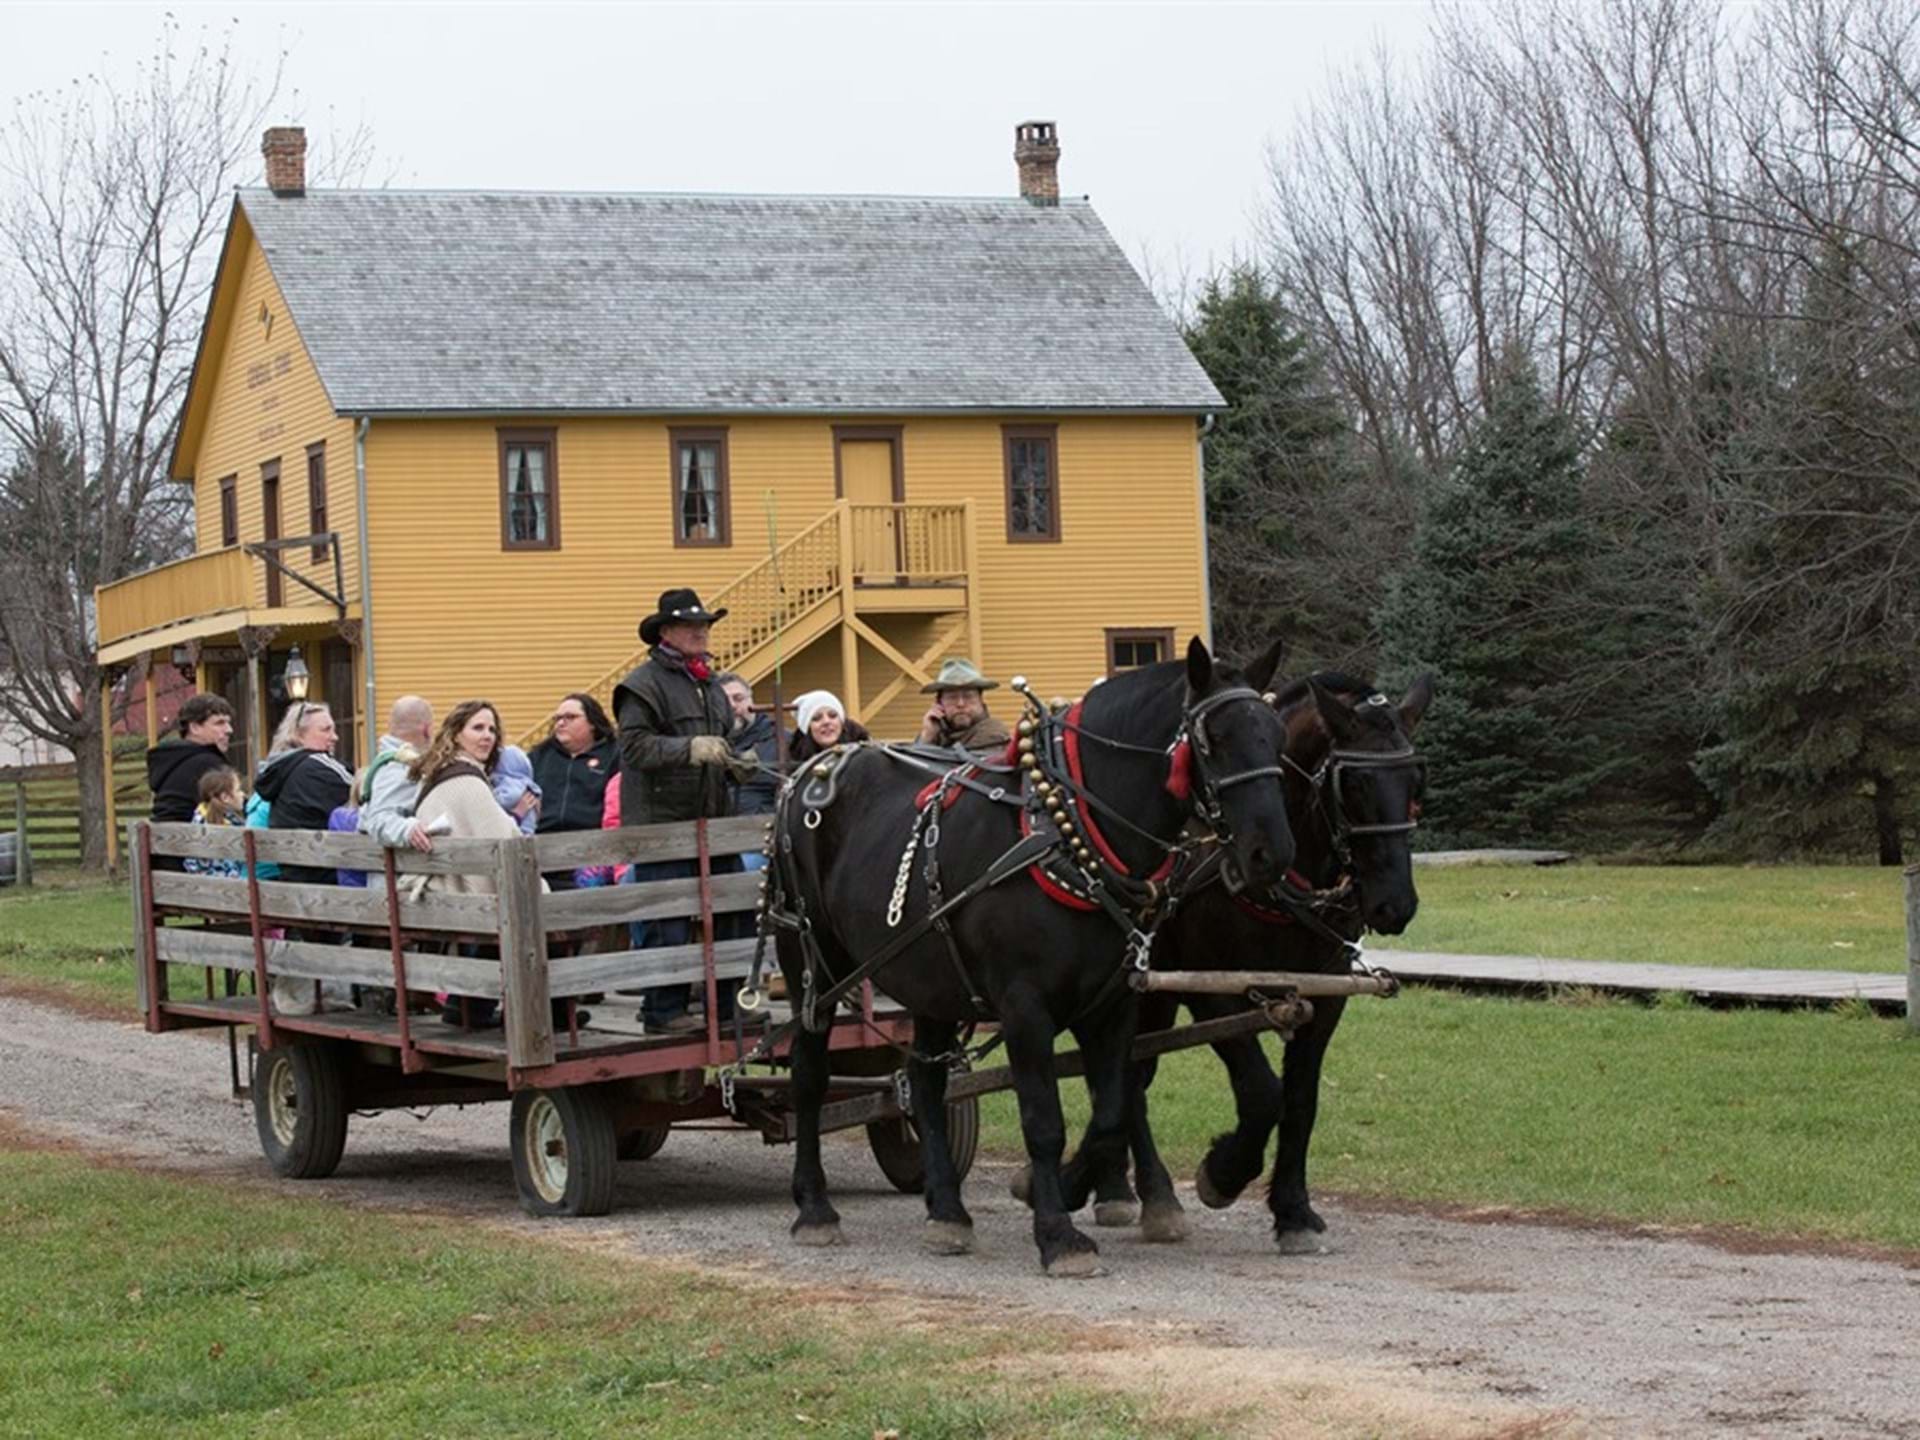 Wagon ride through our 1875 Town pulled by Percheron draft horses